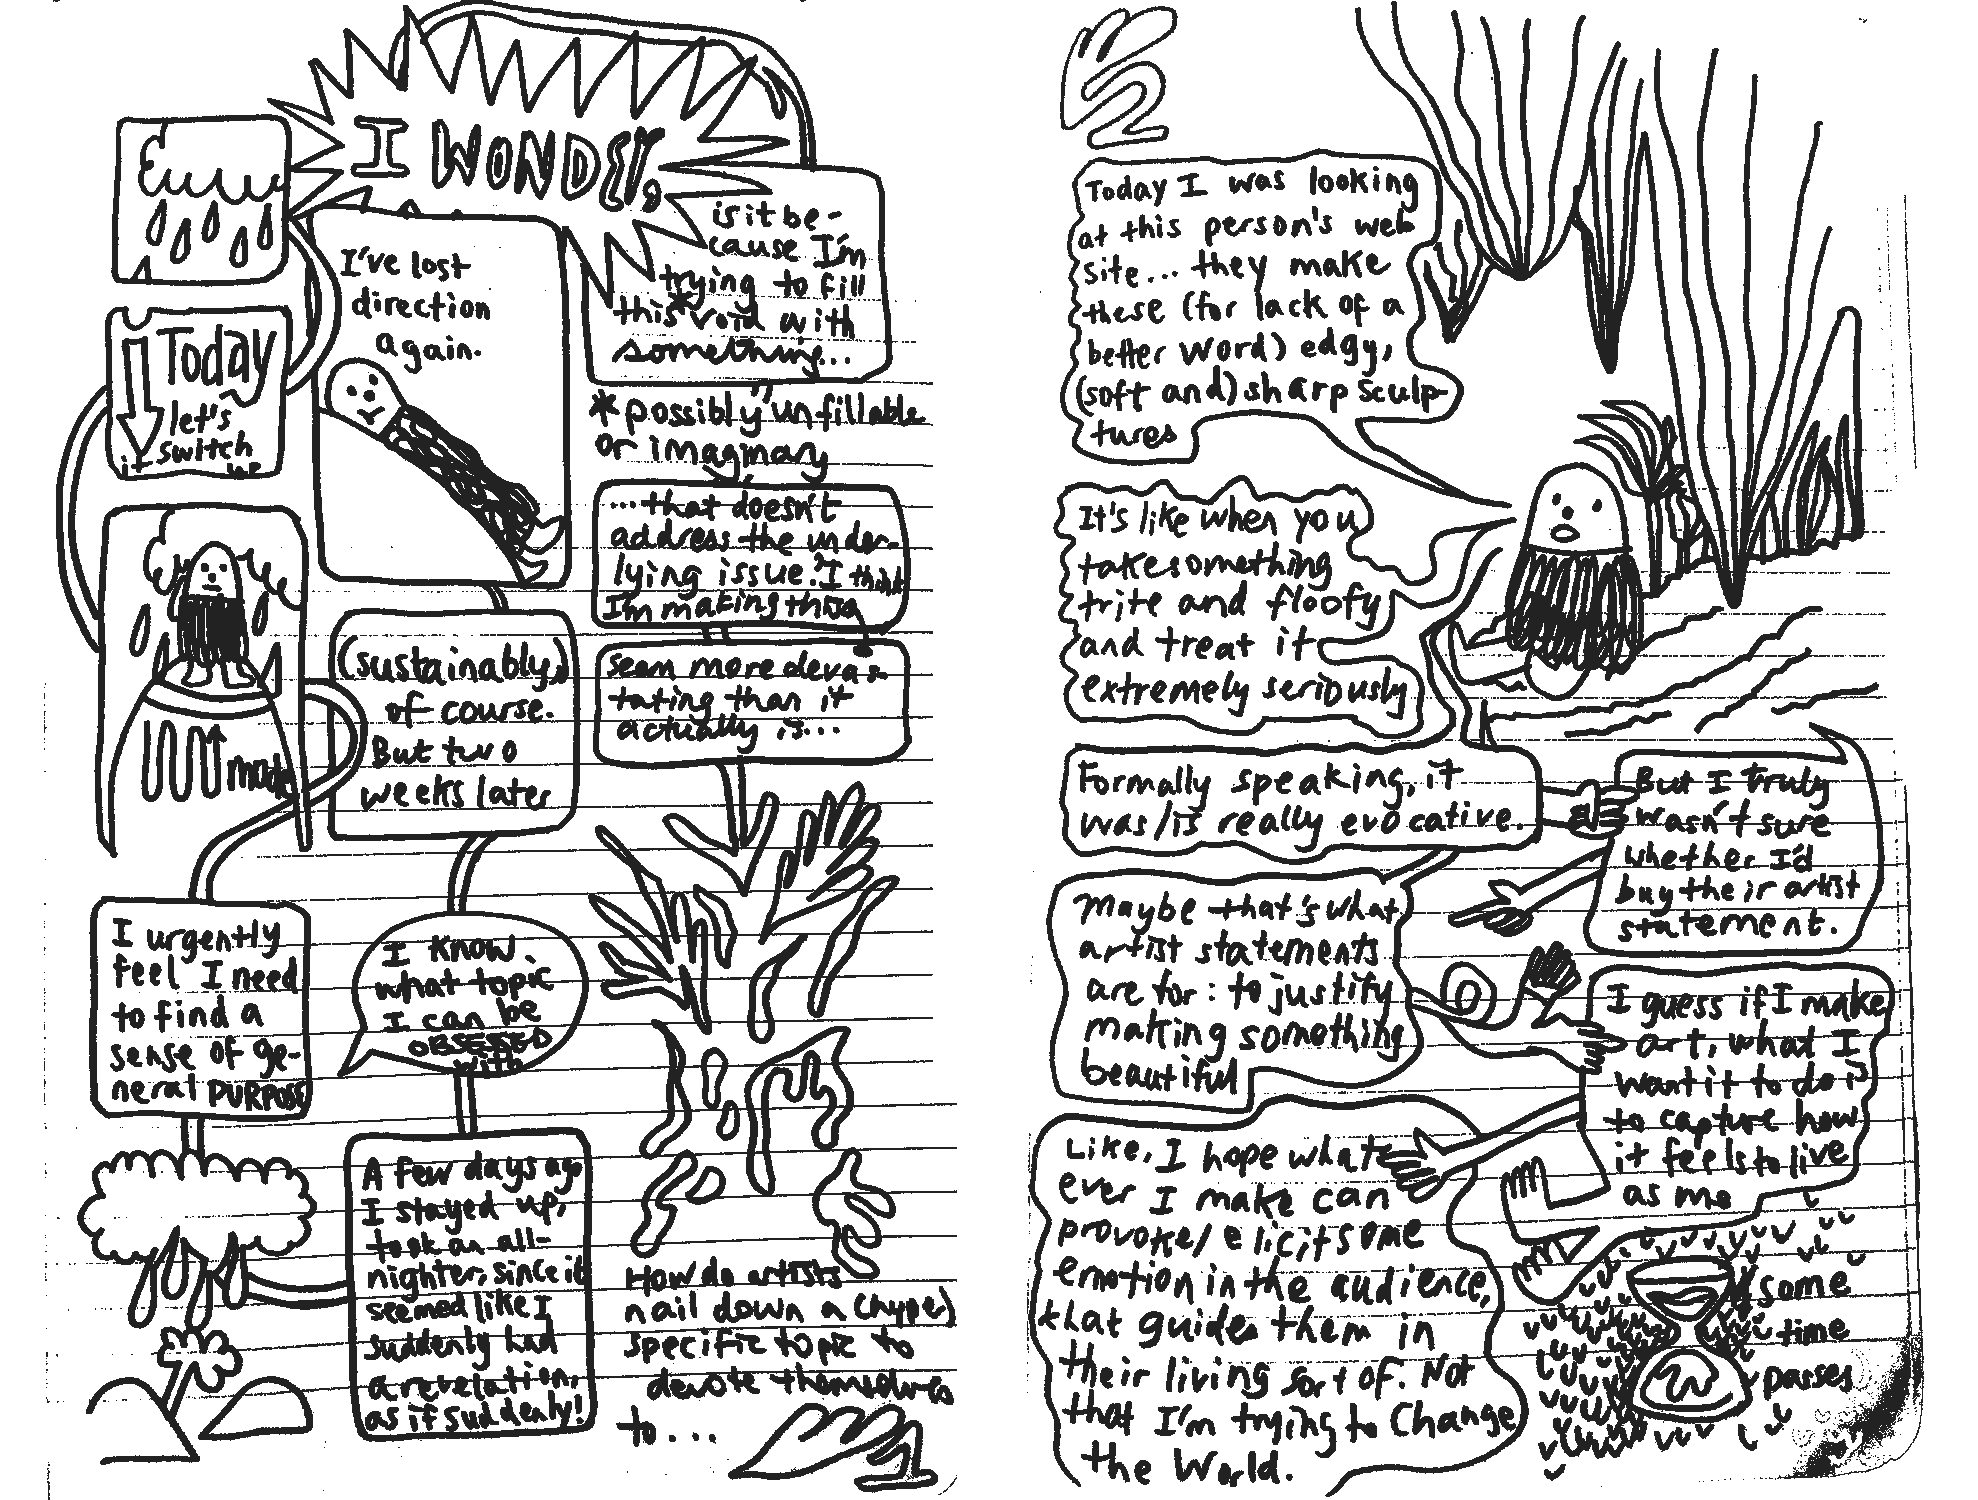 a diary entry composed of doodles and scattered thoughts, in black pen.